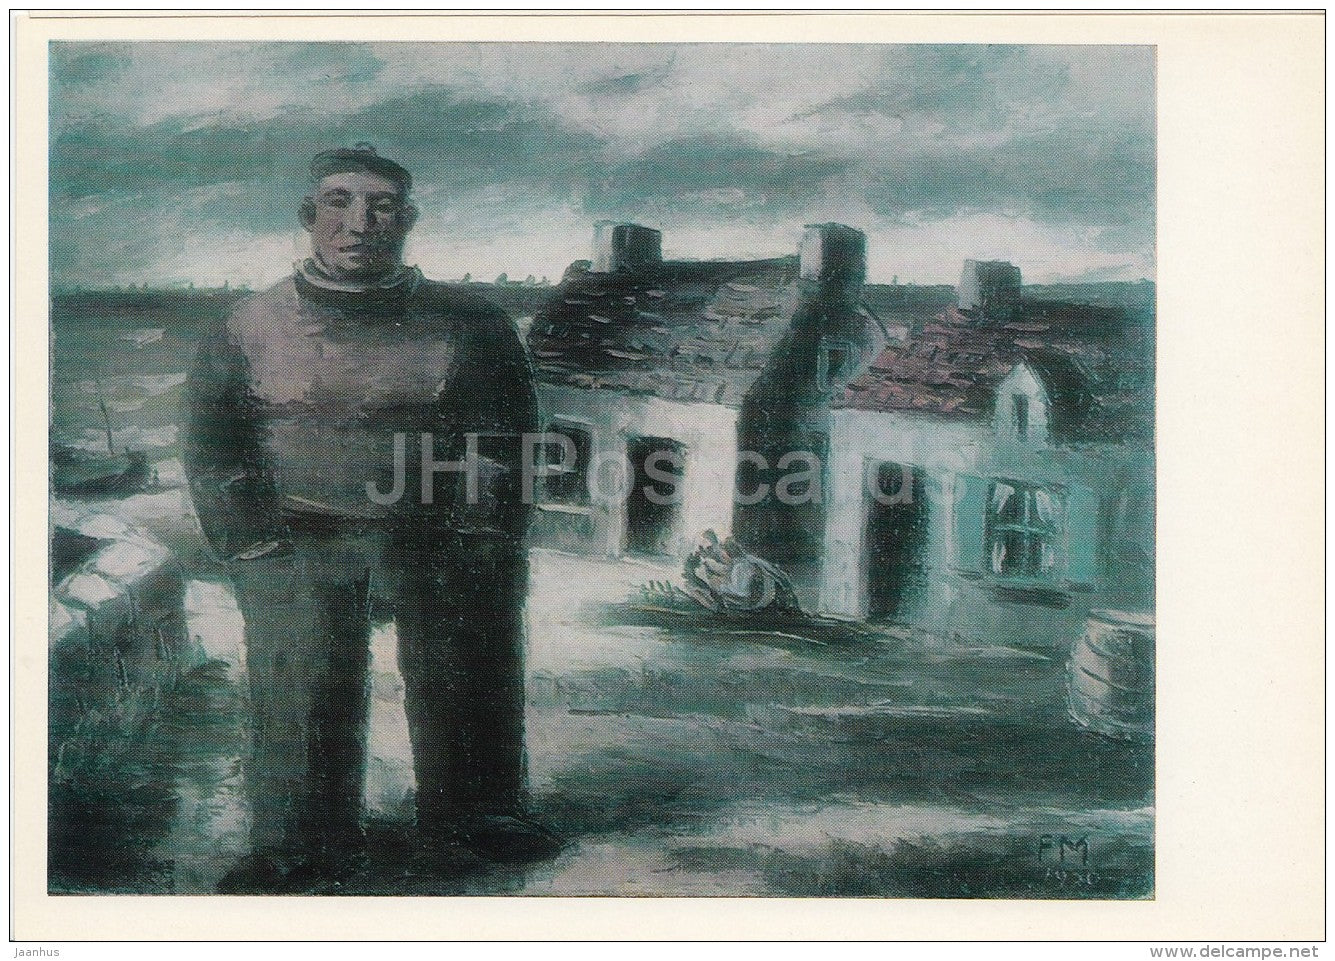 painting by Frans Masereel - Sailor , 1930 - Belgian art - large format - 1974 - Russia USSR - unused - JH Postcards